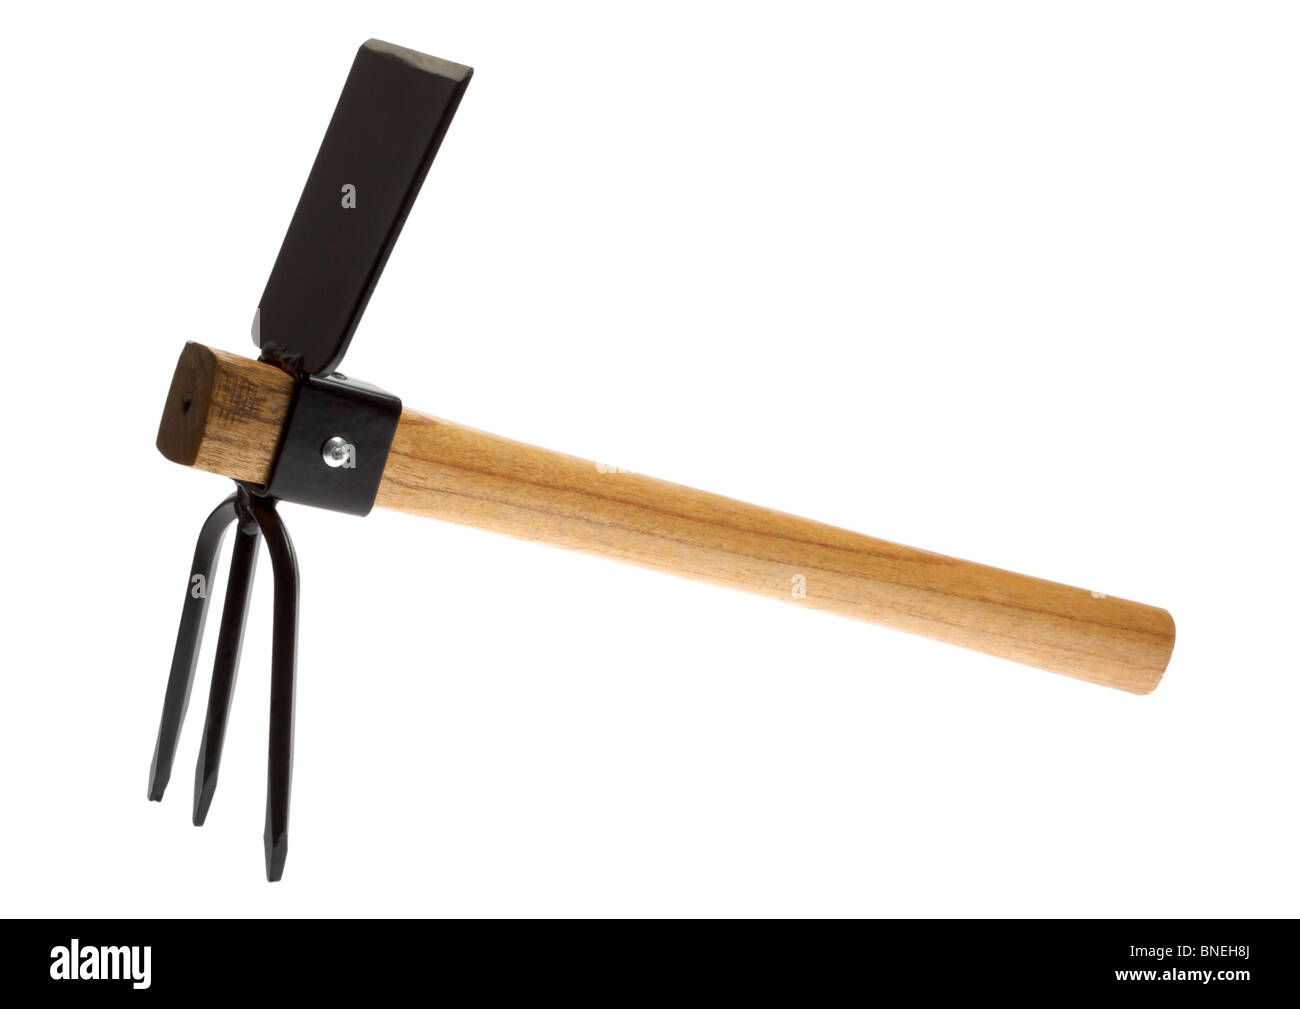 Wooden handled cultivator on white background Stock Photo - Alamy